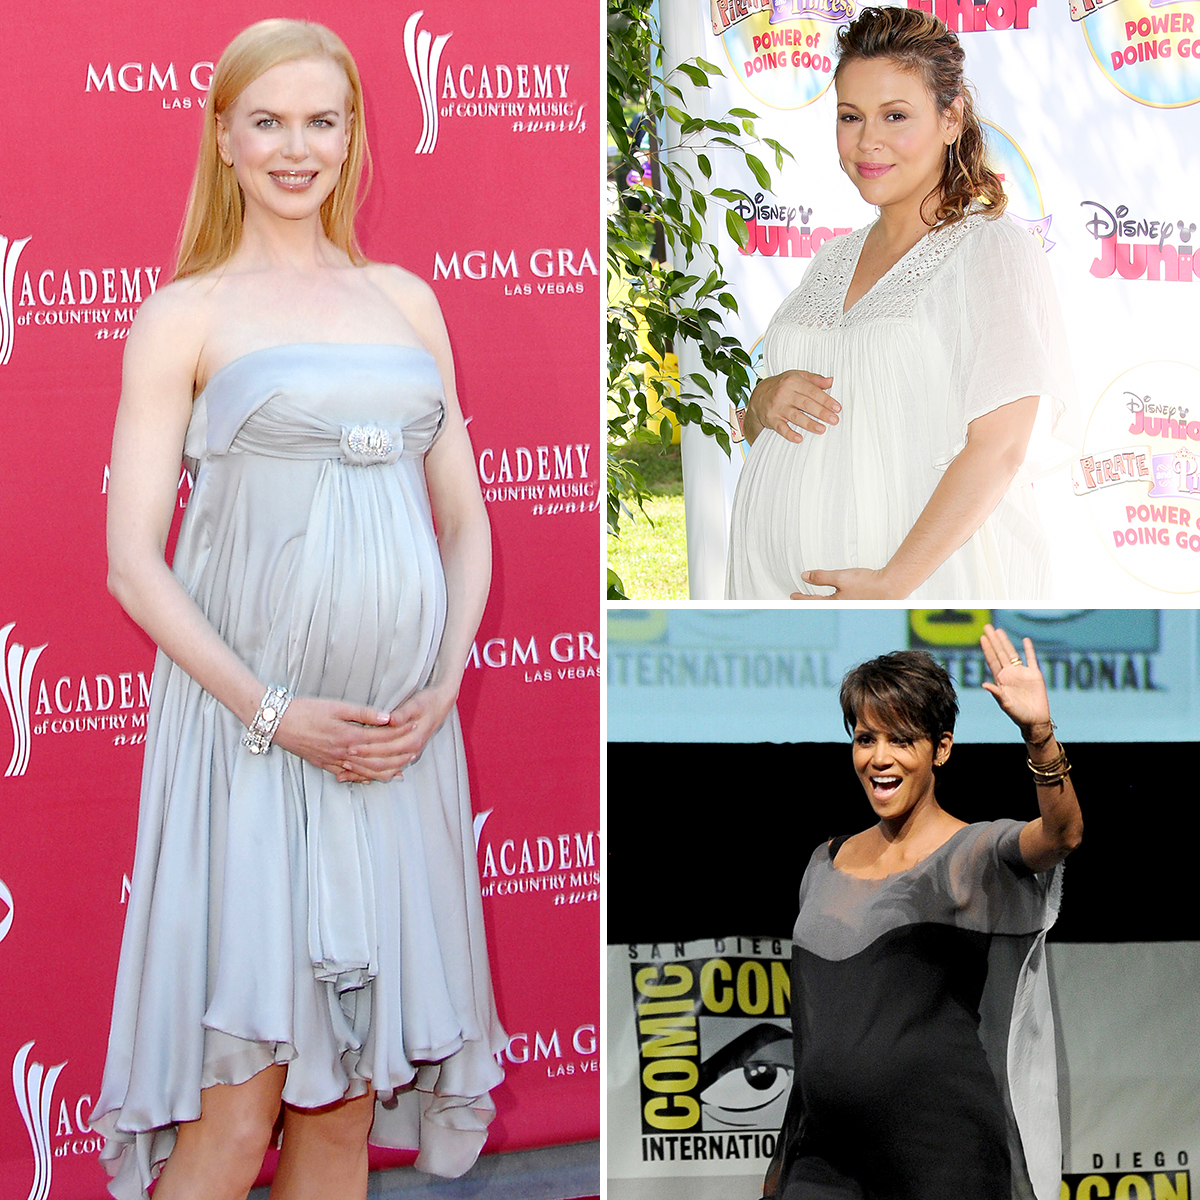 Baby Girl Pregnant - Celebrities Over 40 and Pregnant: Baby Bump Pics